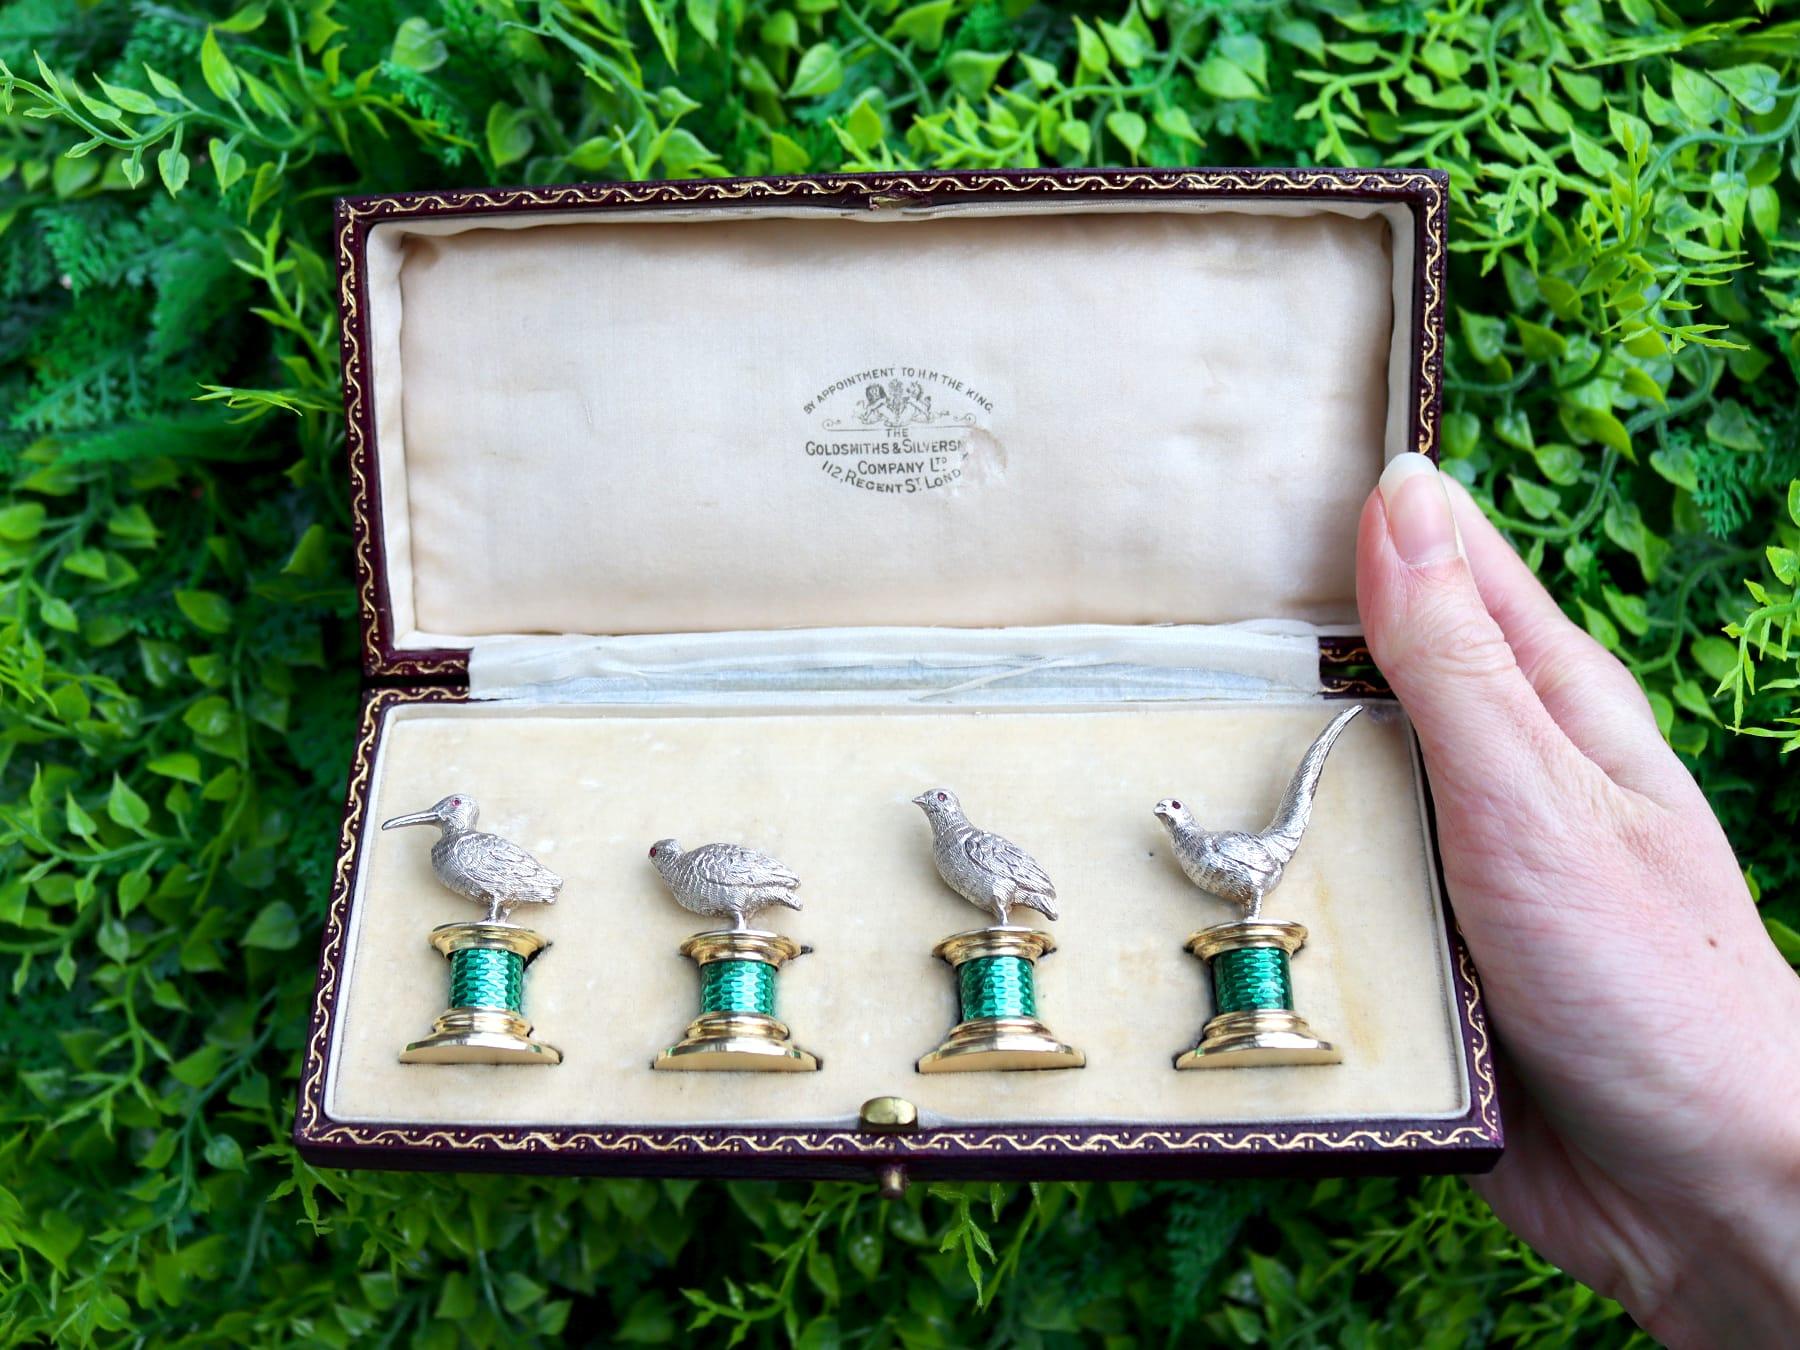 An exceptional, fine and impressive set of four antique Edwardian English sterling silver and enamel bird menu / card holders - boxed; an addition to our diverse dining silverware collection.

These exceptional antique Edwardian cast sterling silver